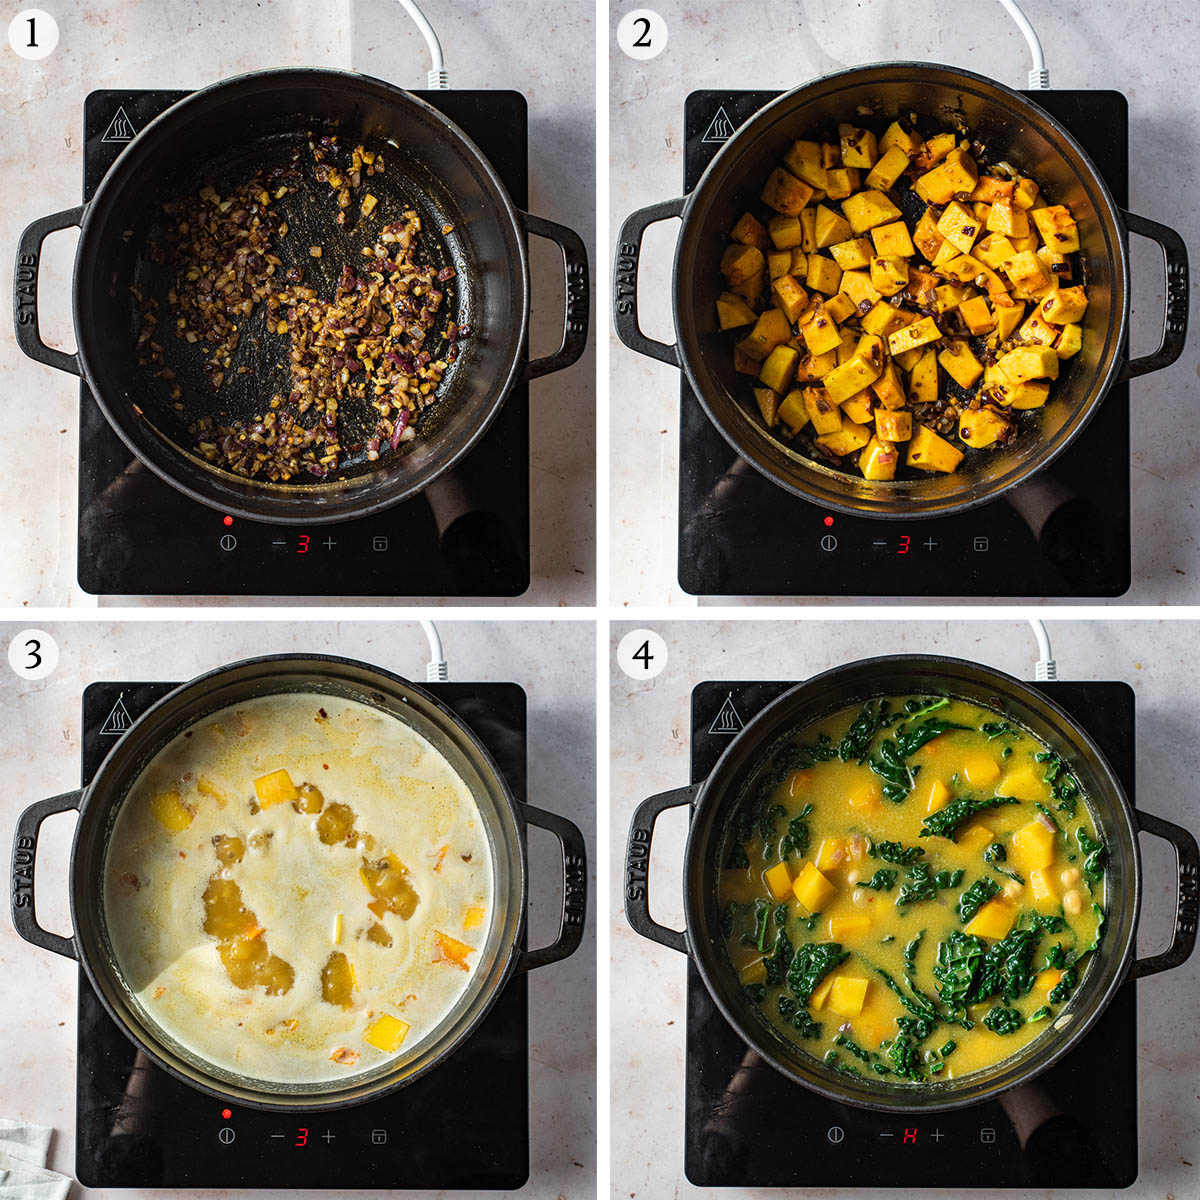 Chickpea pumpkin curry steps 1 to 4.